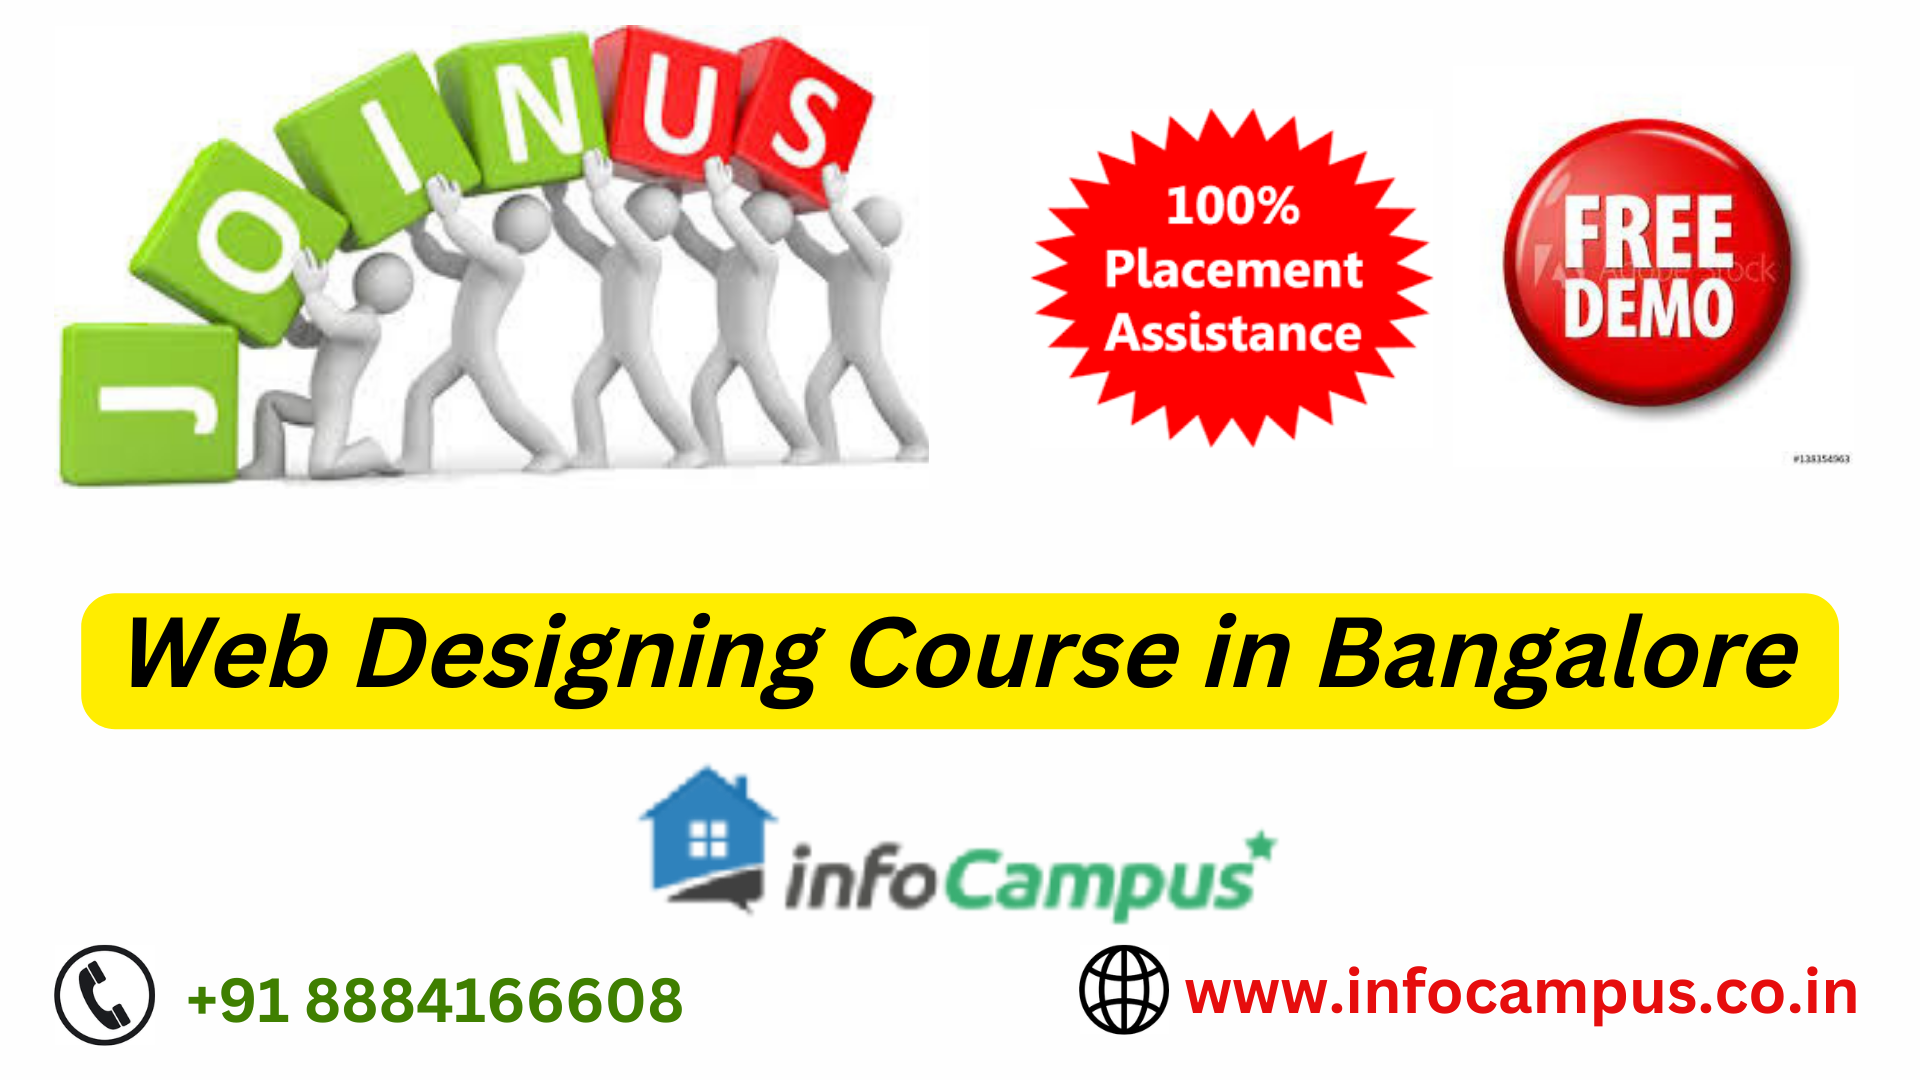 Web Designing Course in BangaloreComputers and MobilesLaptopsAll Indiaother